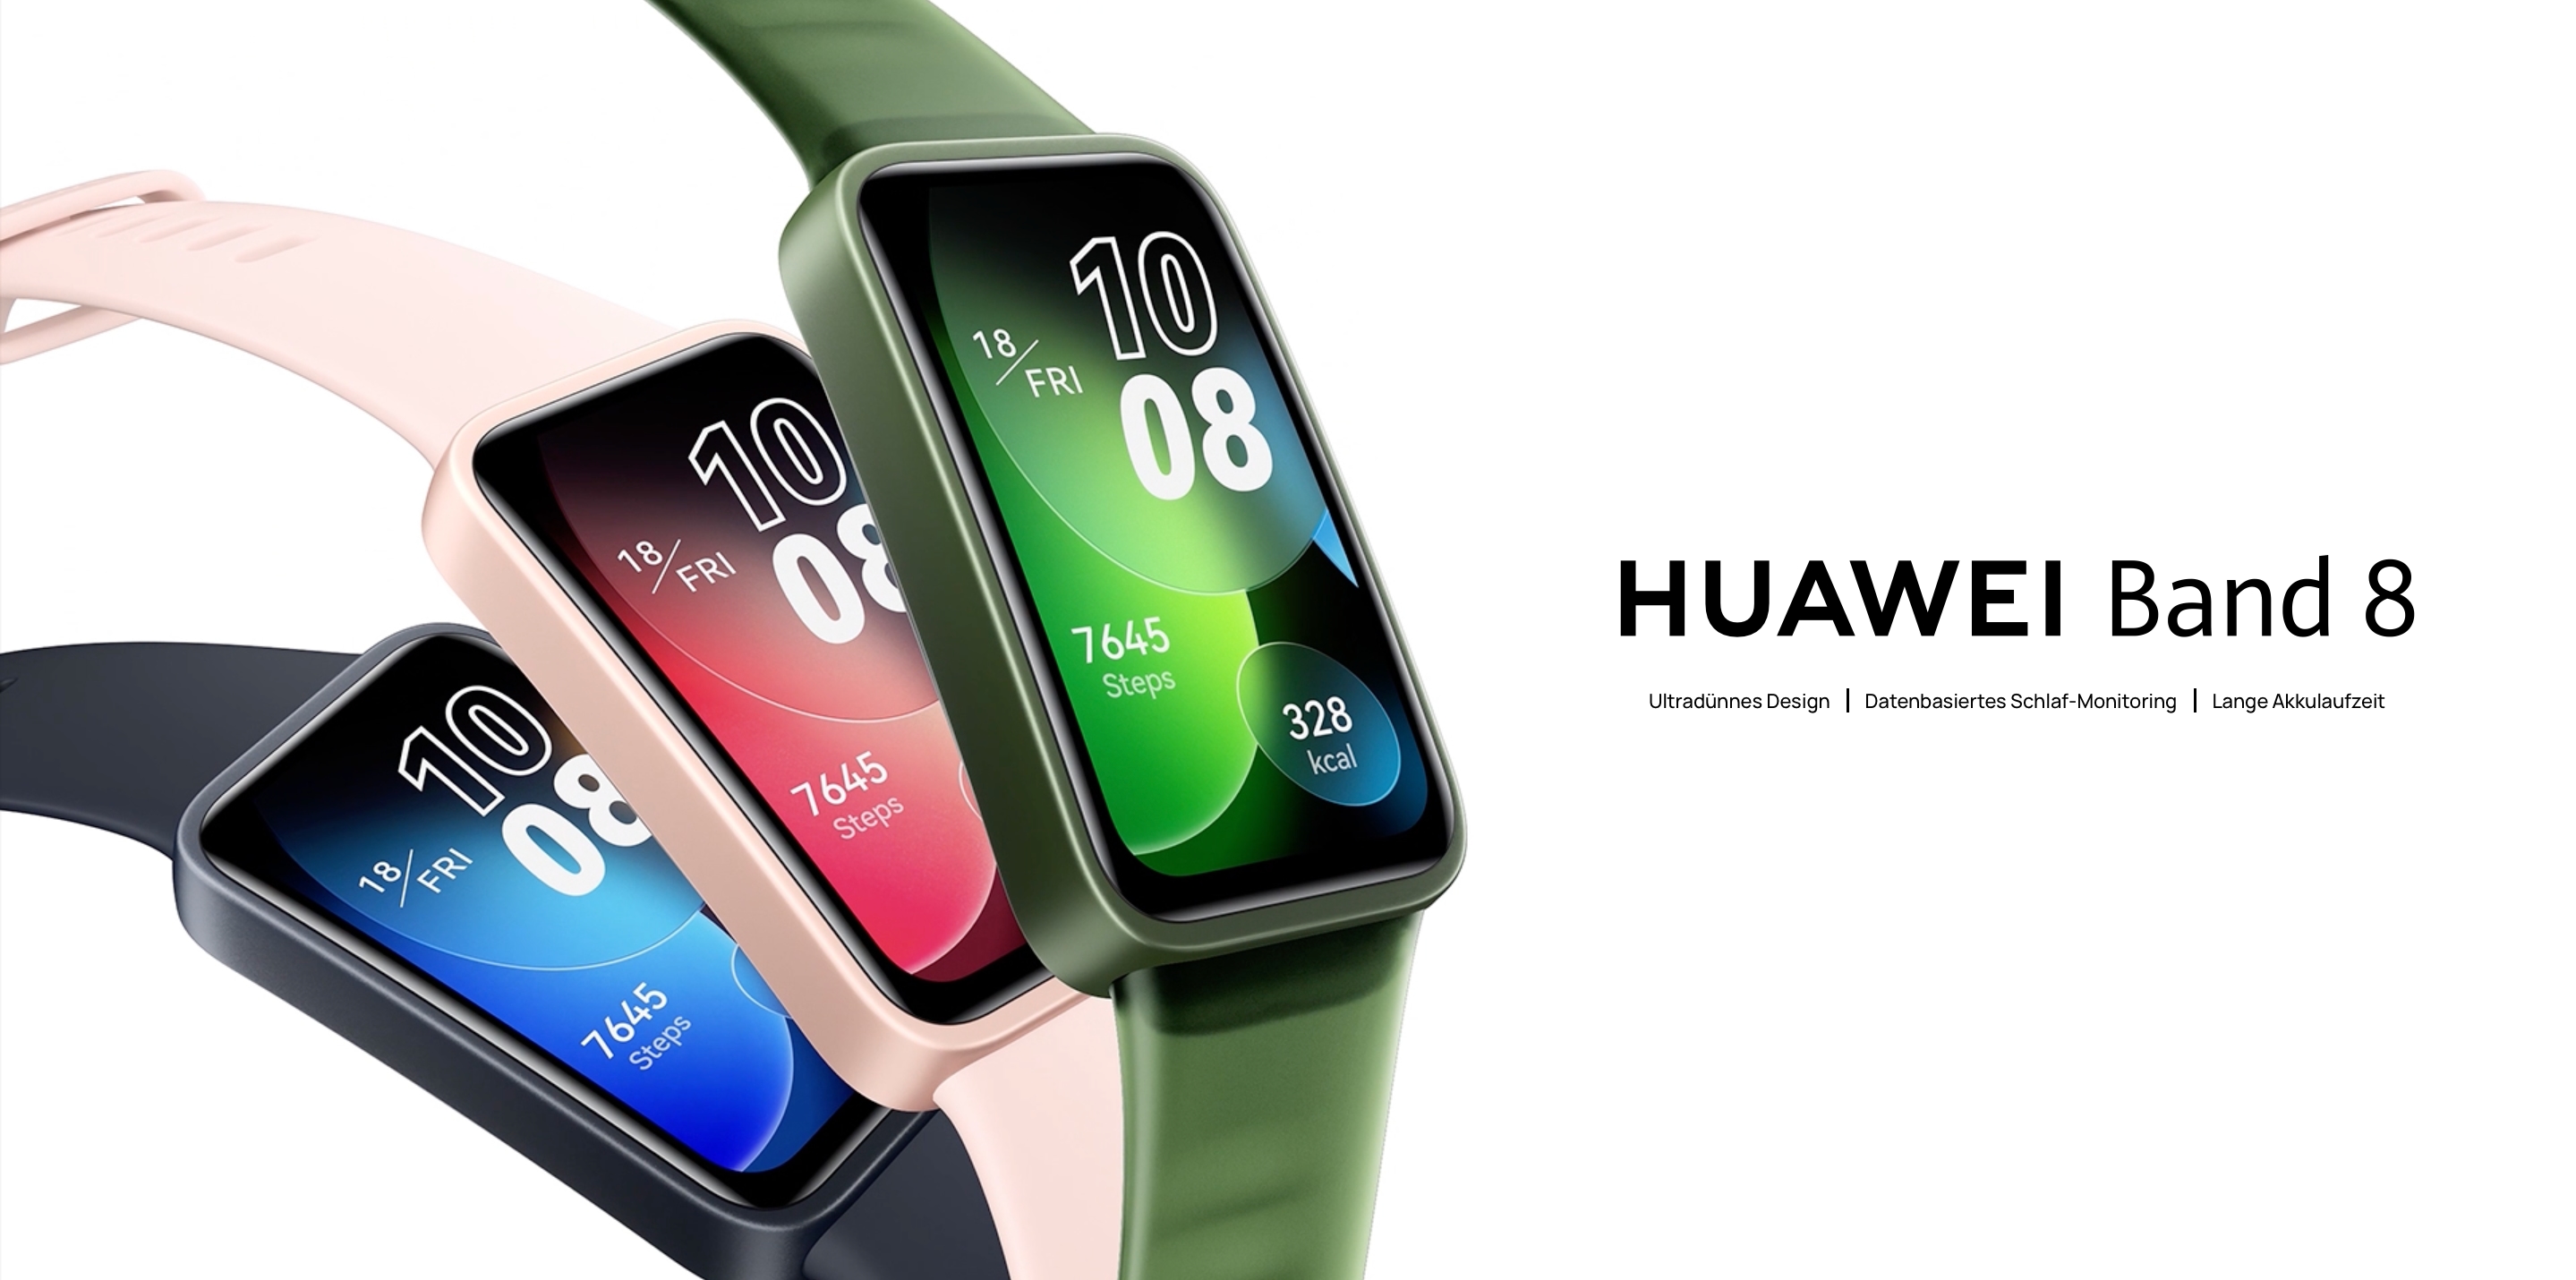 Huawei Band 8 with AMOLED screen, SpO2 sensor, battery life of up to 14 days and a price of 59 euros debuted in Germany